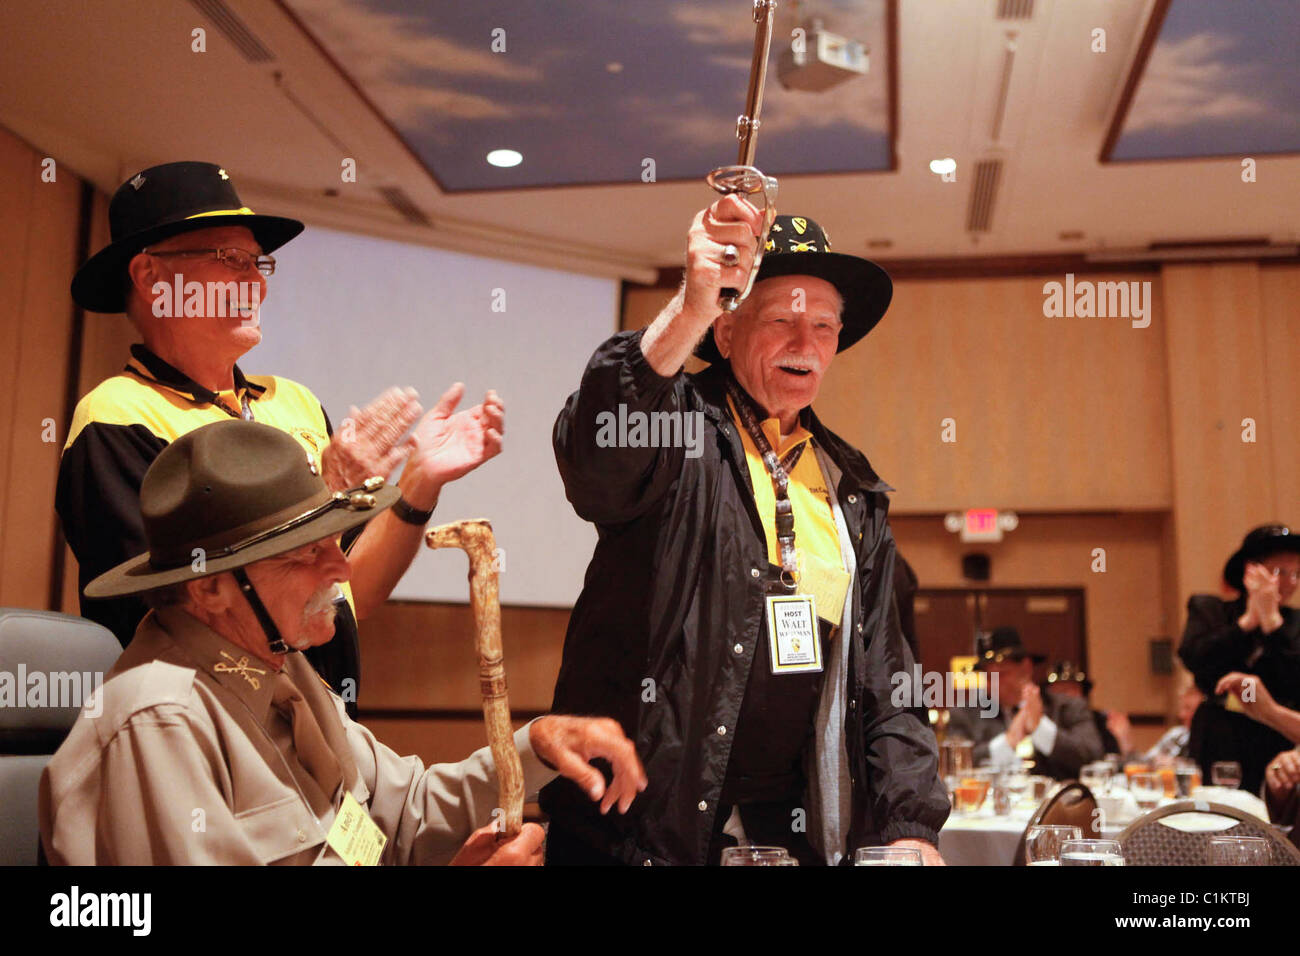 Walter Westman, who is 100-years old, picks up a Cavalry Saber while celebrating his birthday First Cavalry Division reunion. Stock Photo